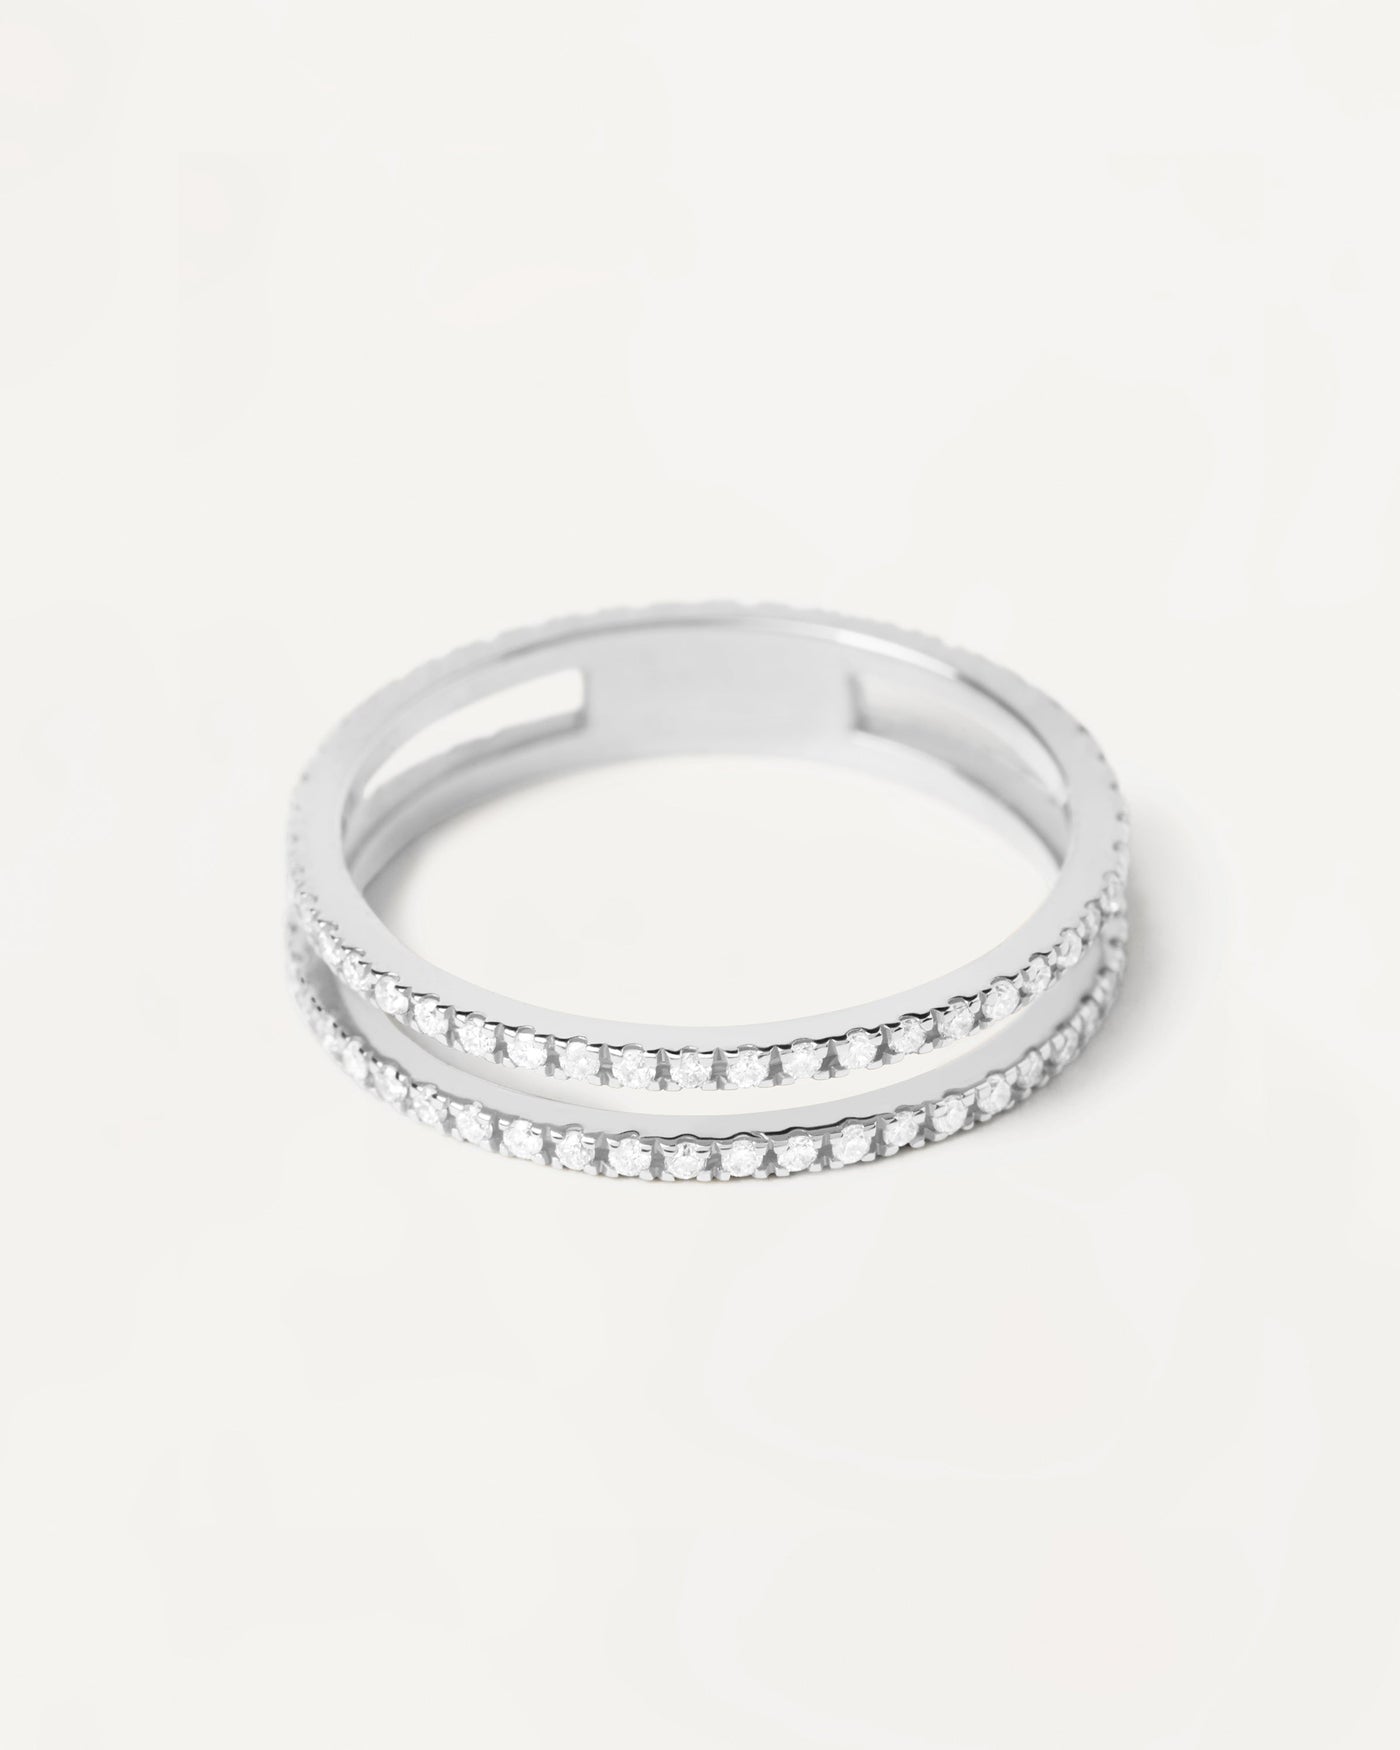 2023 Selection | Diamonds And White Gold Eternity Dual Ring. Get the latest arrival from PDPAOLA. Place your order safely and get this Best Seller. Free Shipping over 40€